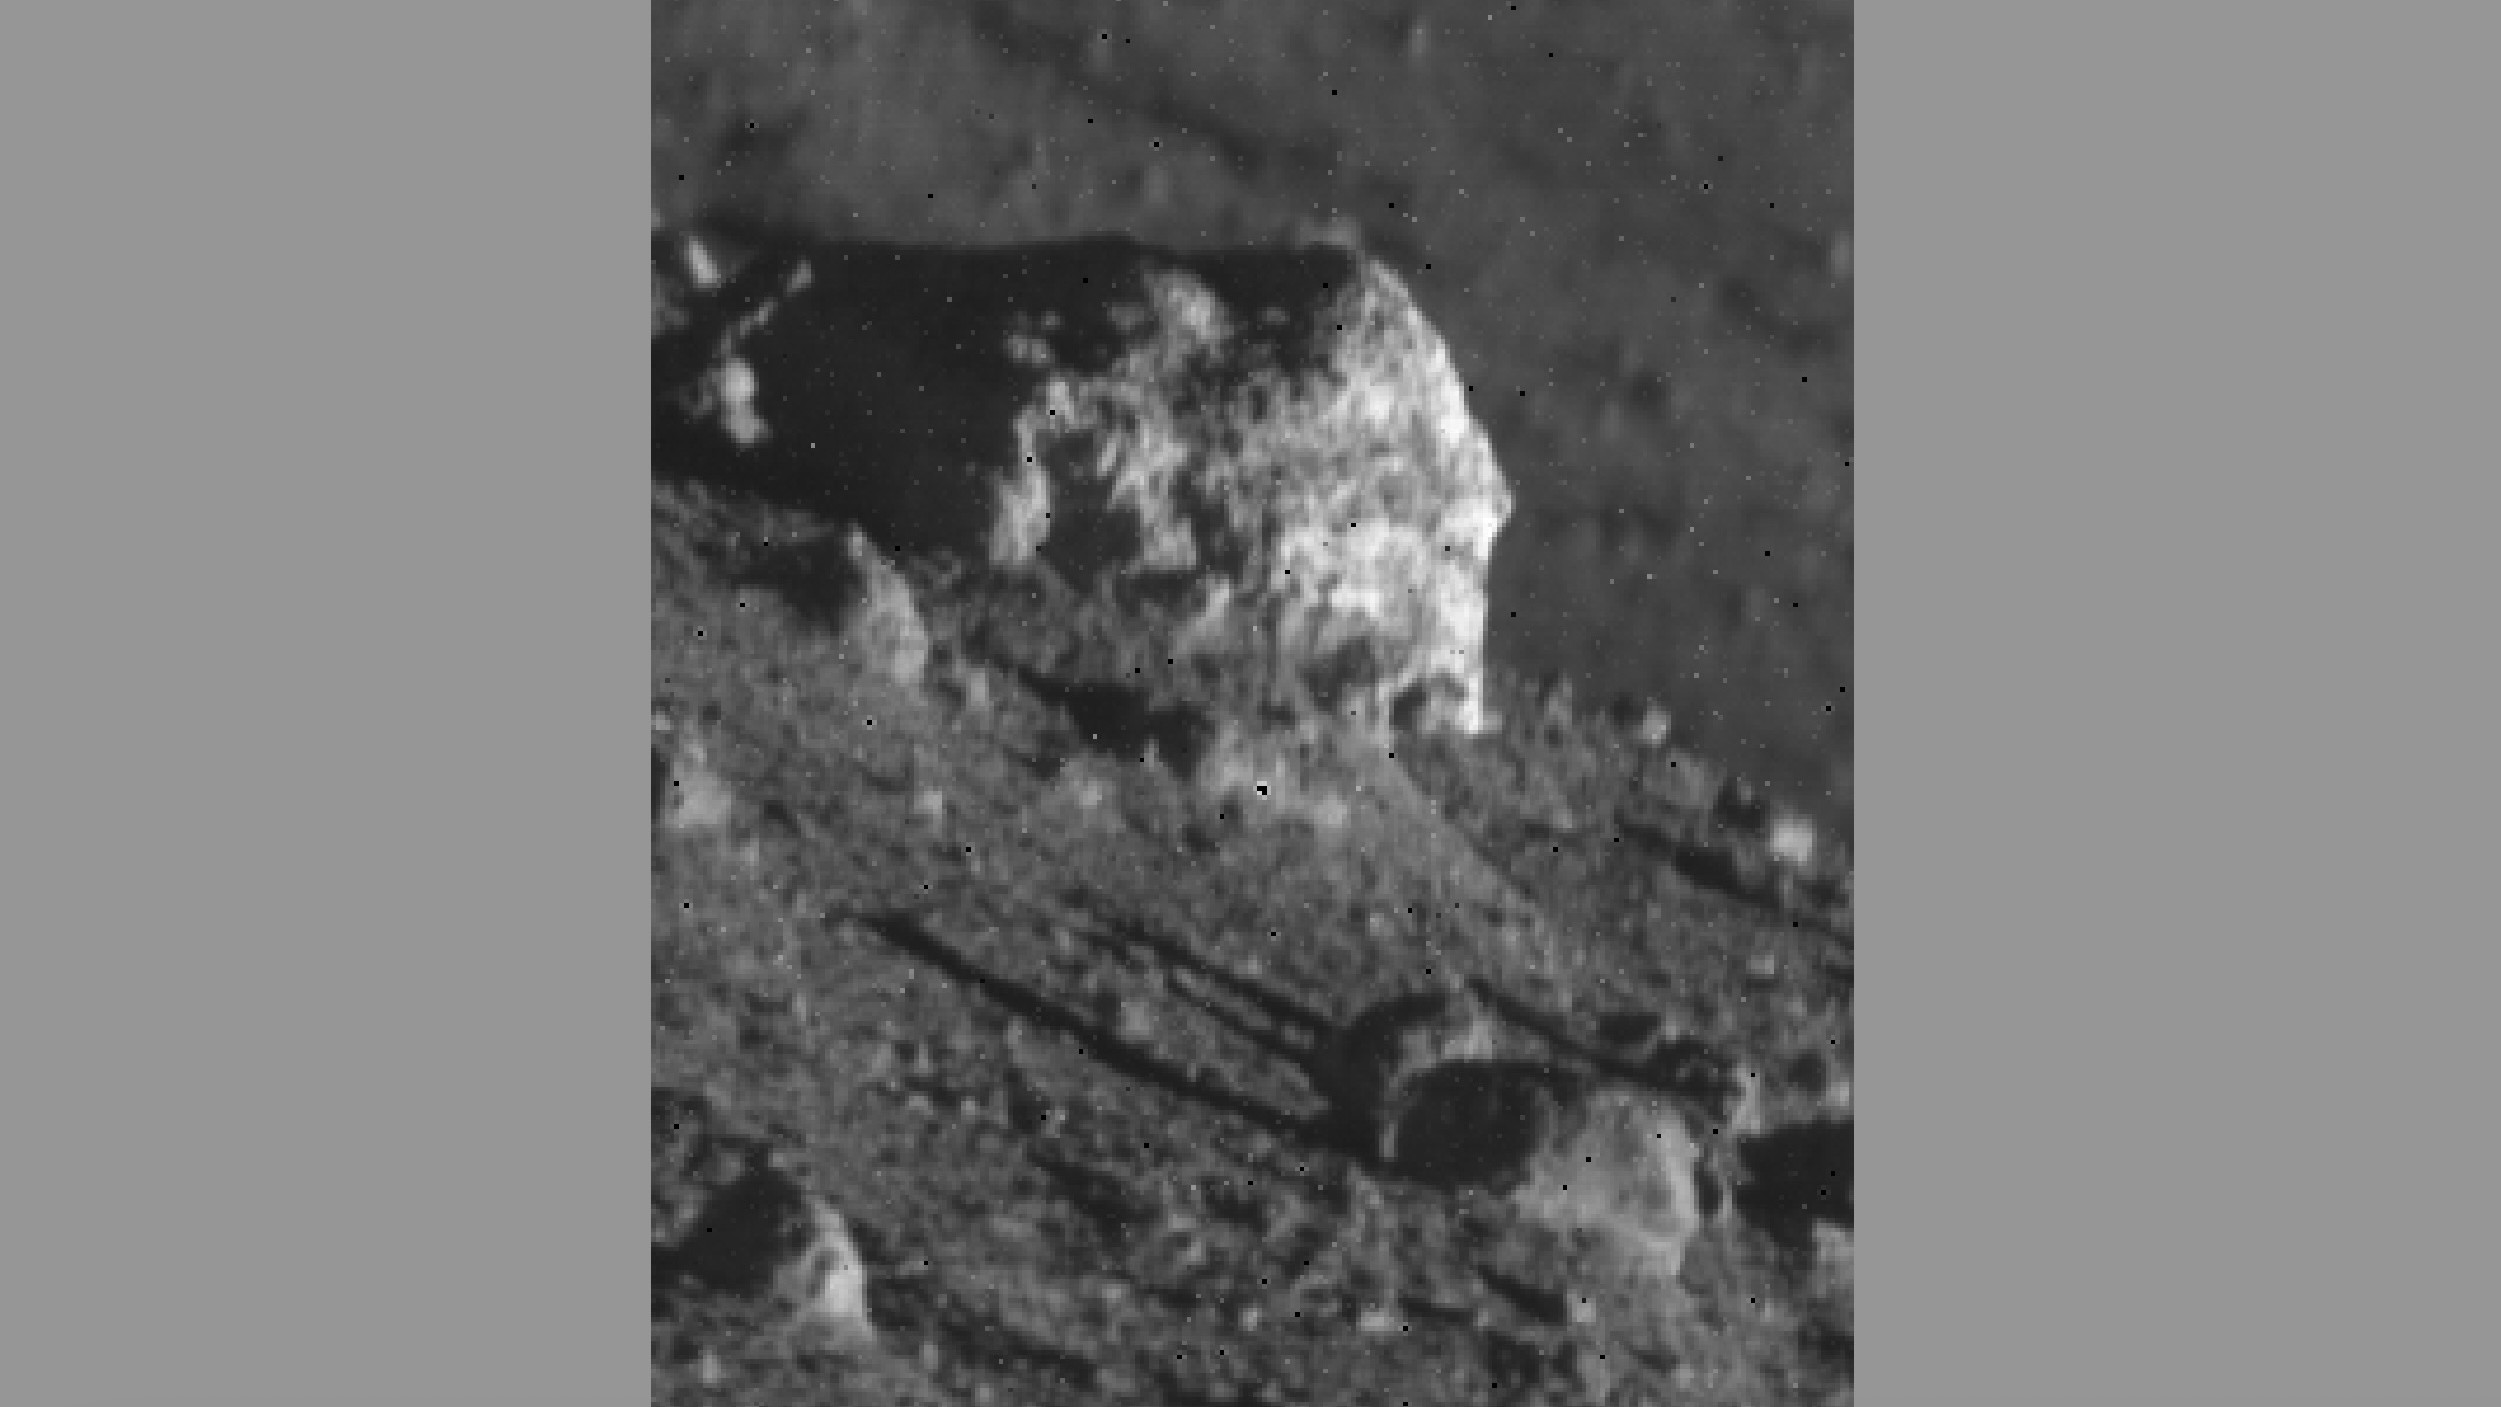 A close-up view of a large rock on the moon's surface, surrounded by smaller rocks.